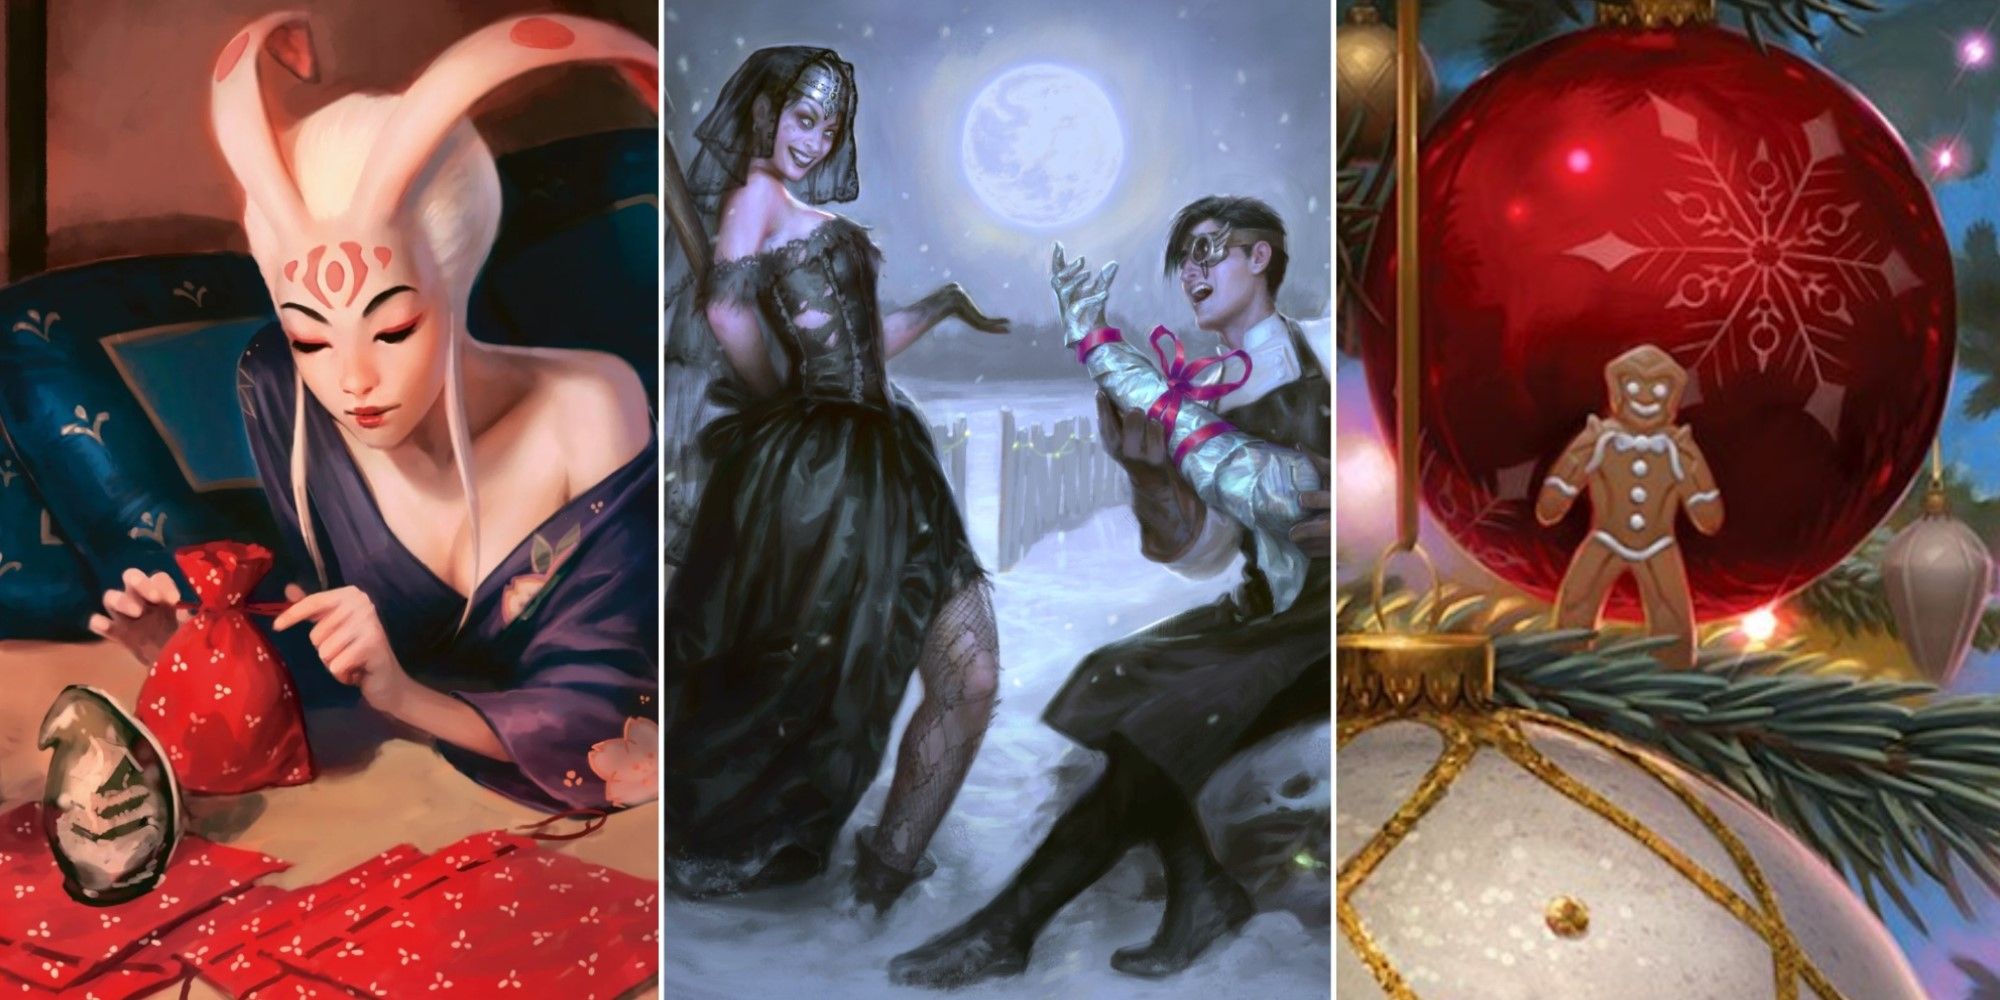 Artwork from three different Holiday promo cards from Magic: The Gathering